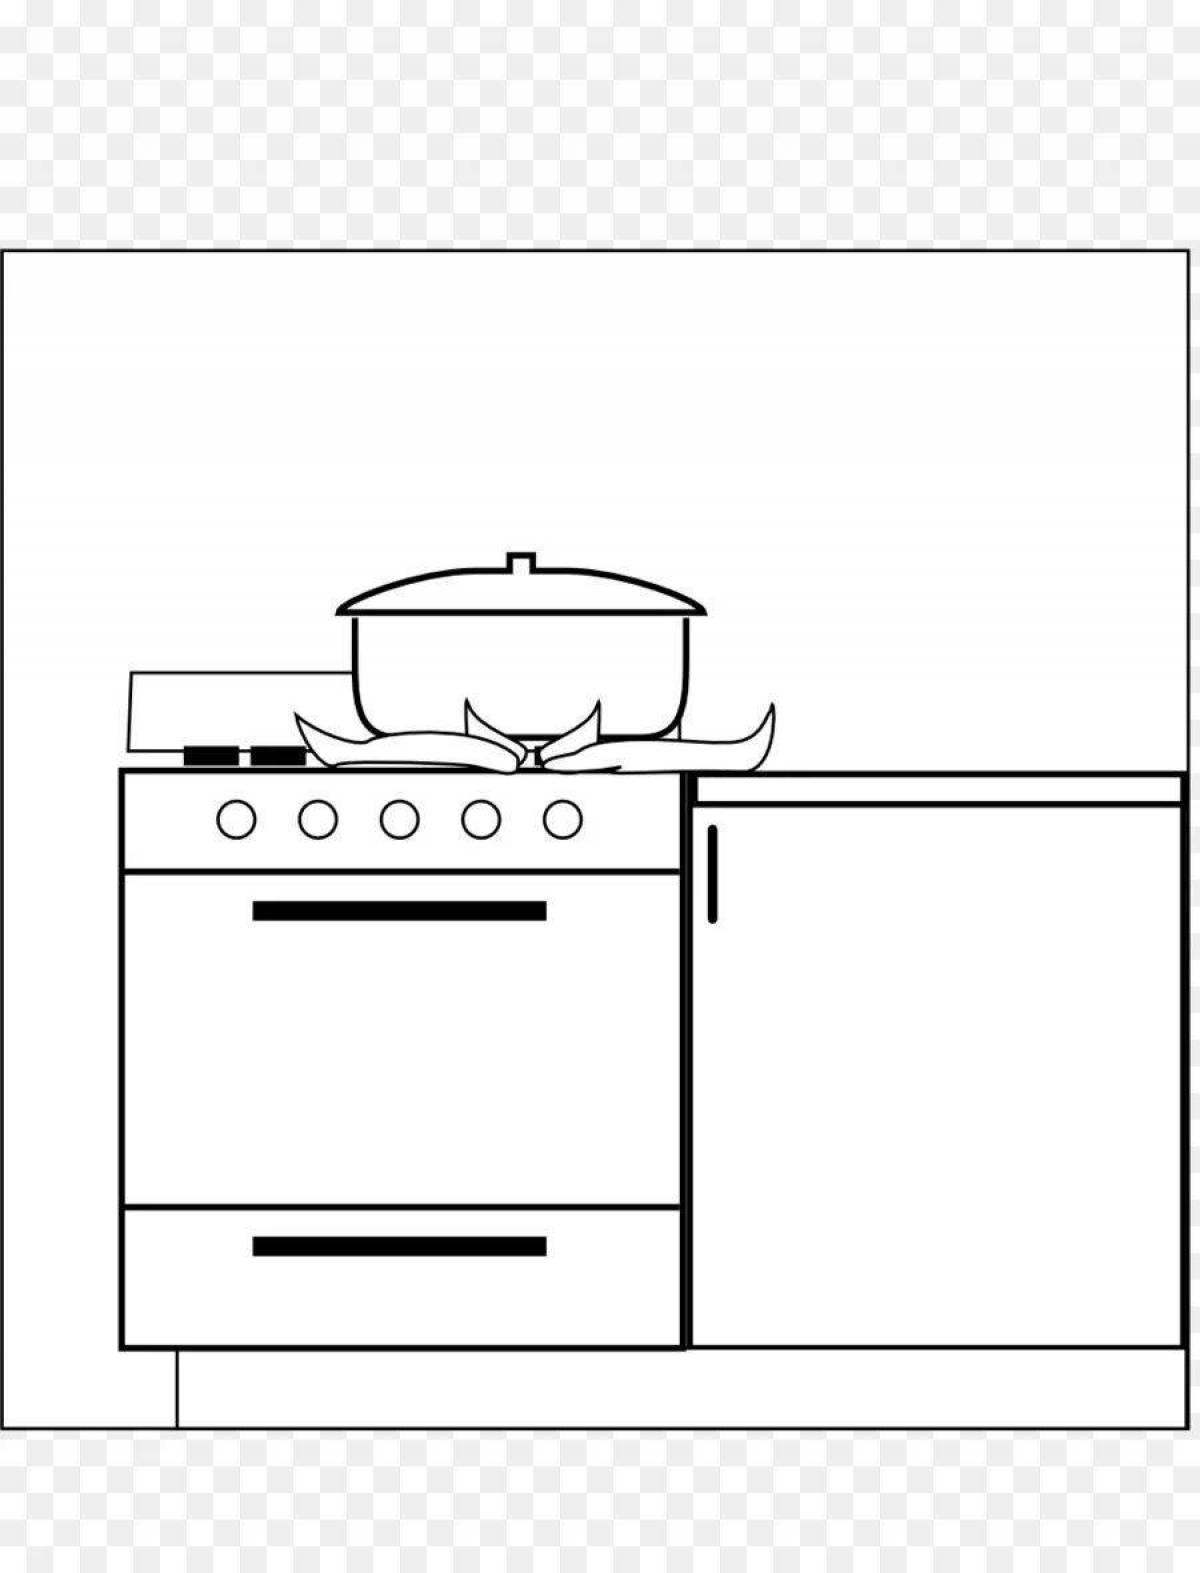 Bright kitchen stove coloring page